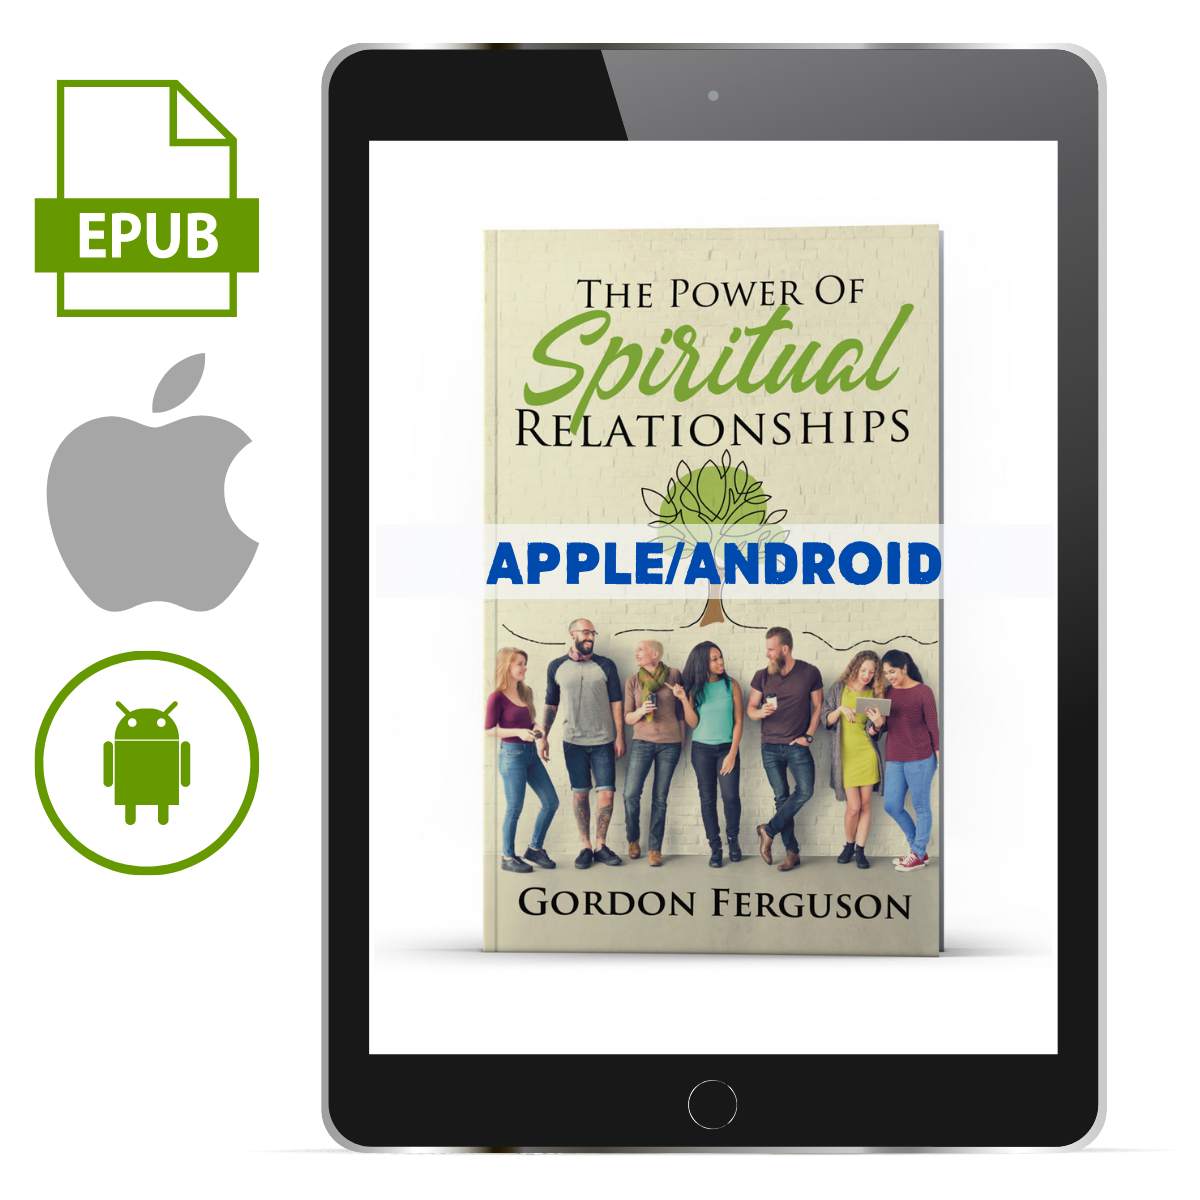 The Power of Spiritual Relationships (Apple/Android Version) - Illumination Publishers